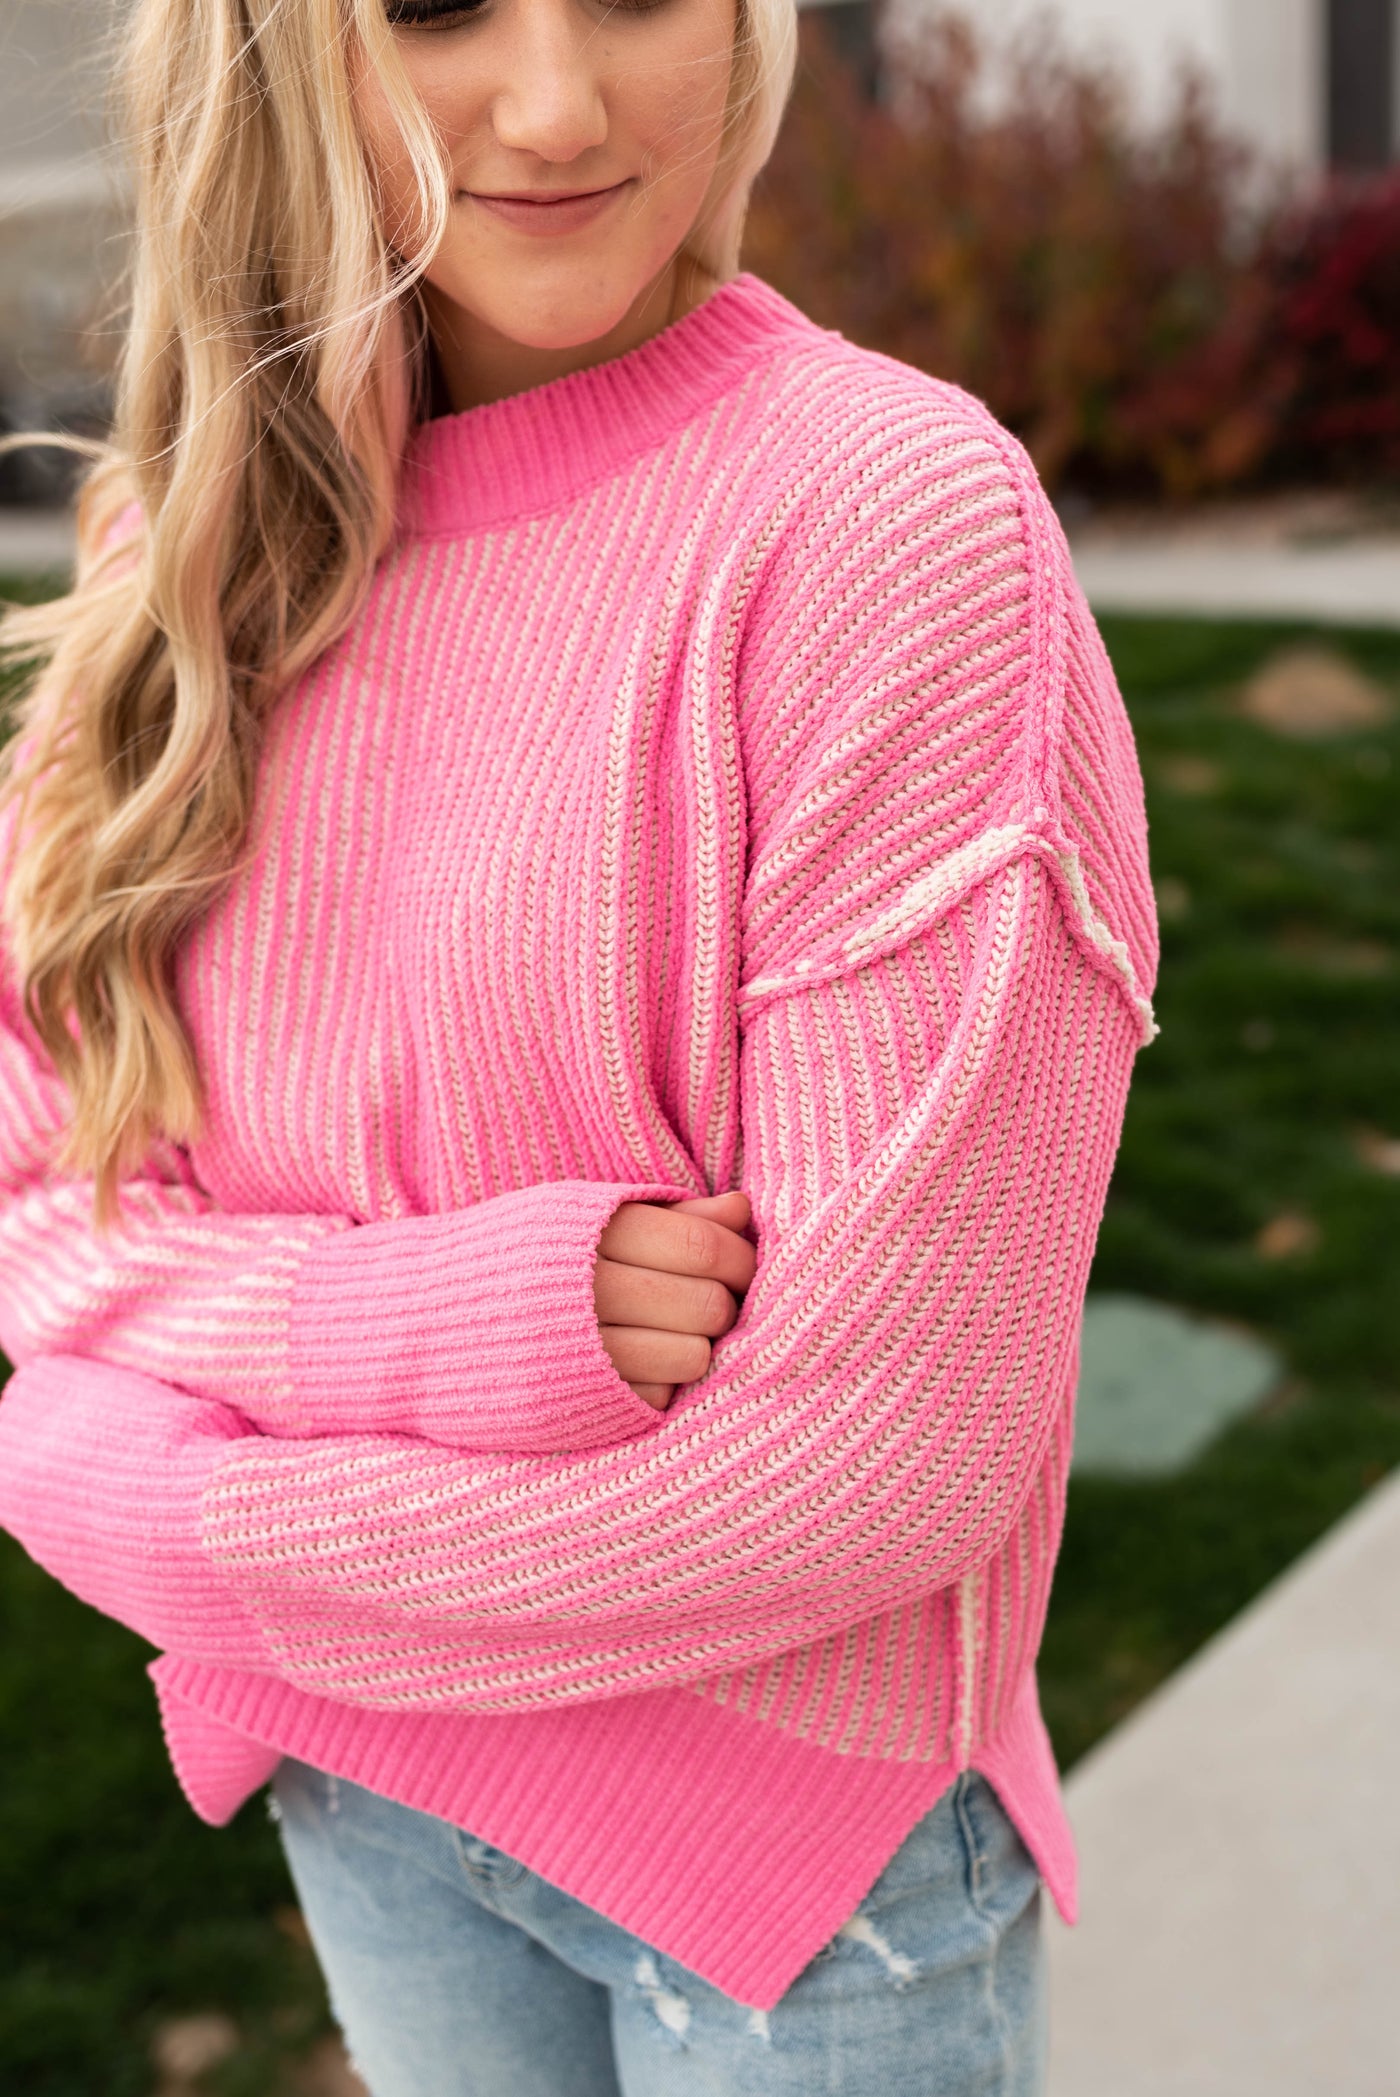 Sleeve view of the pink knit sweater with a drop shoulder